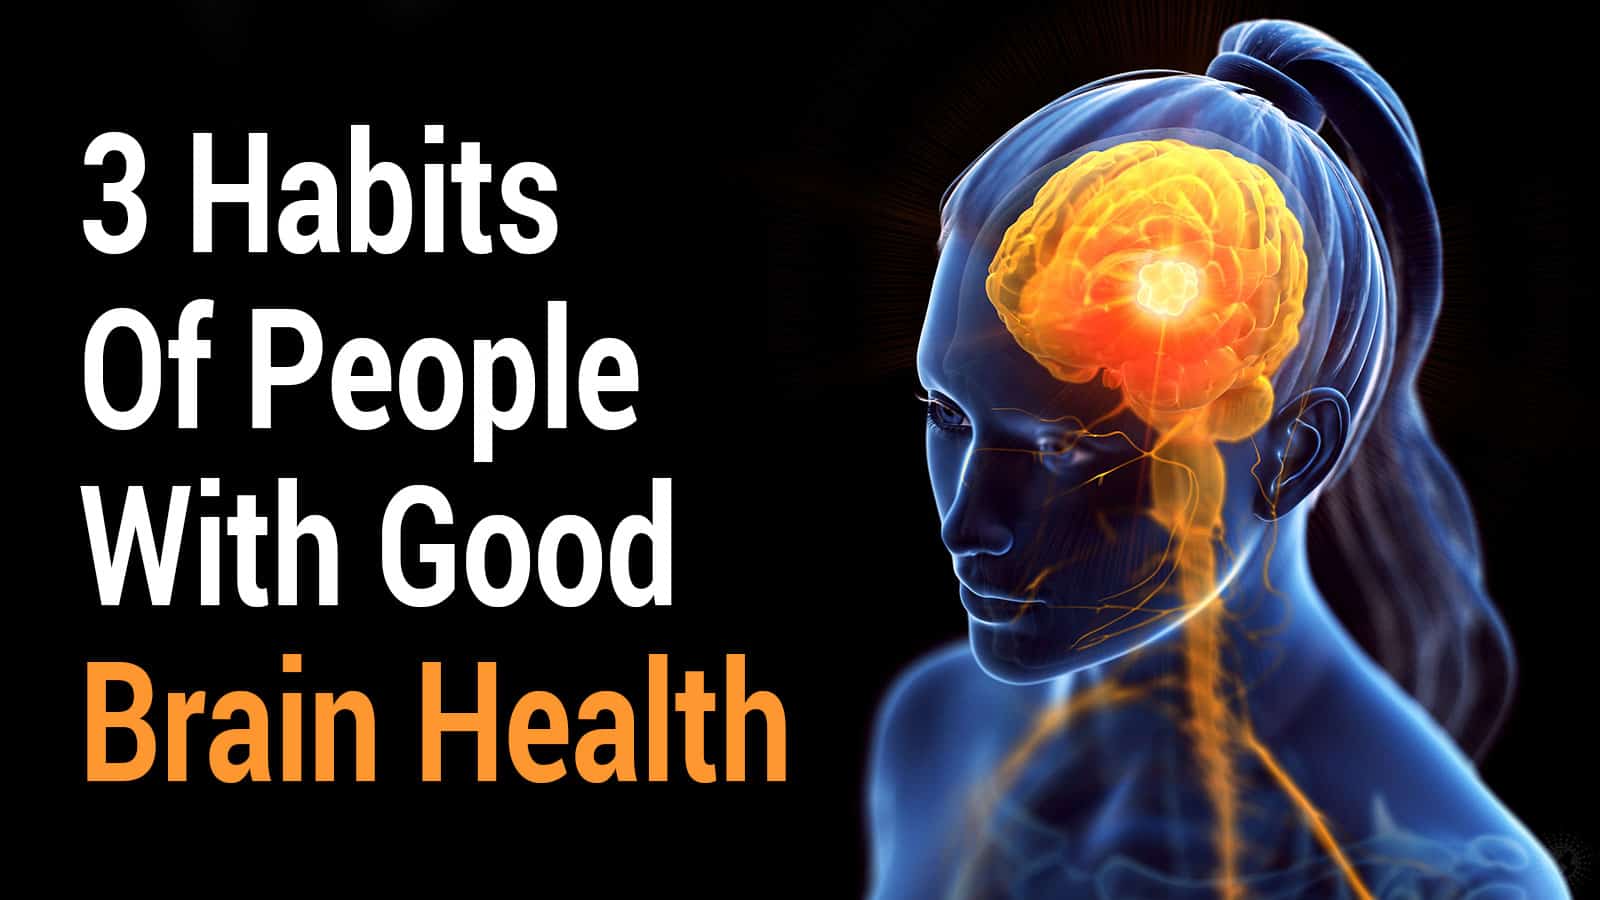 3 Habits Of People With Good Brain Health